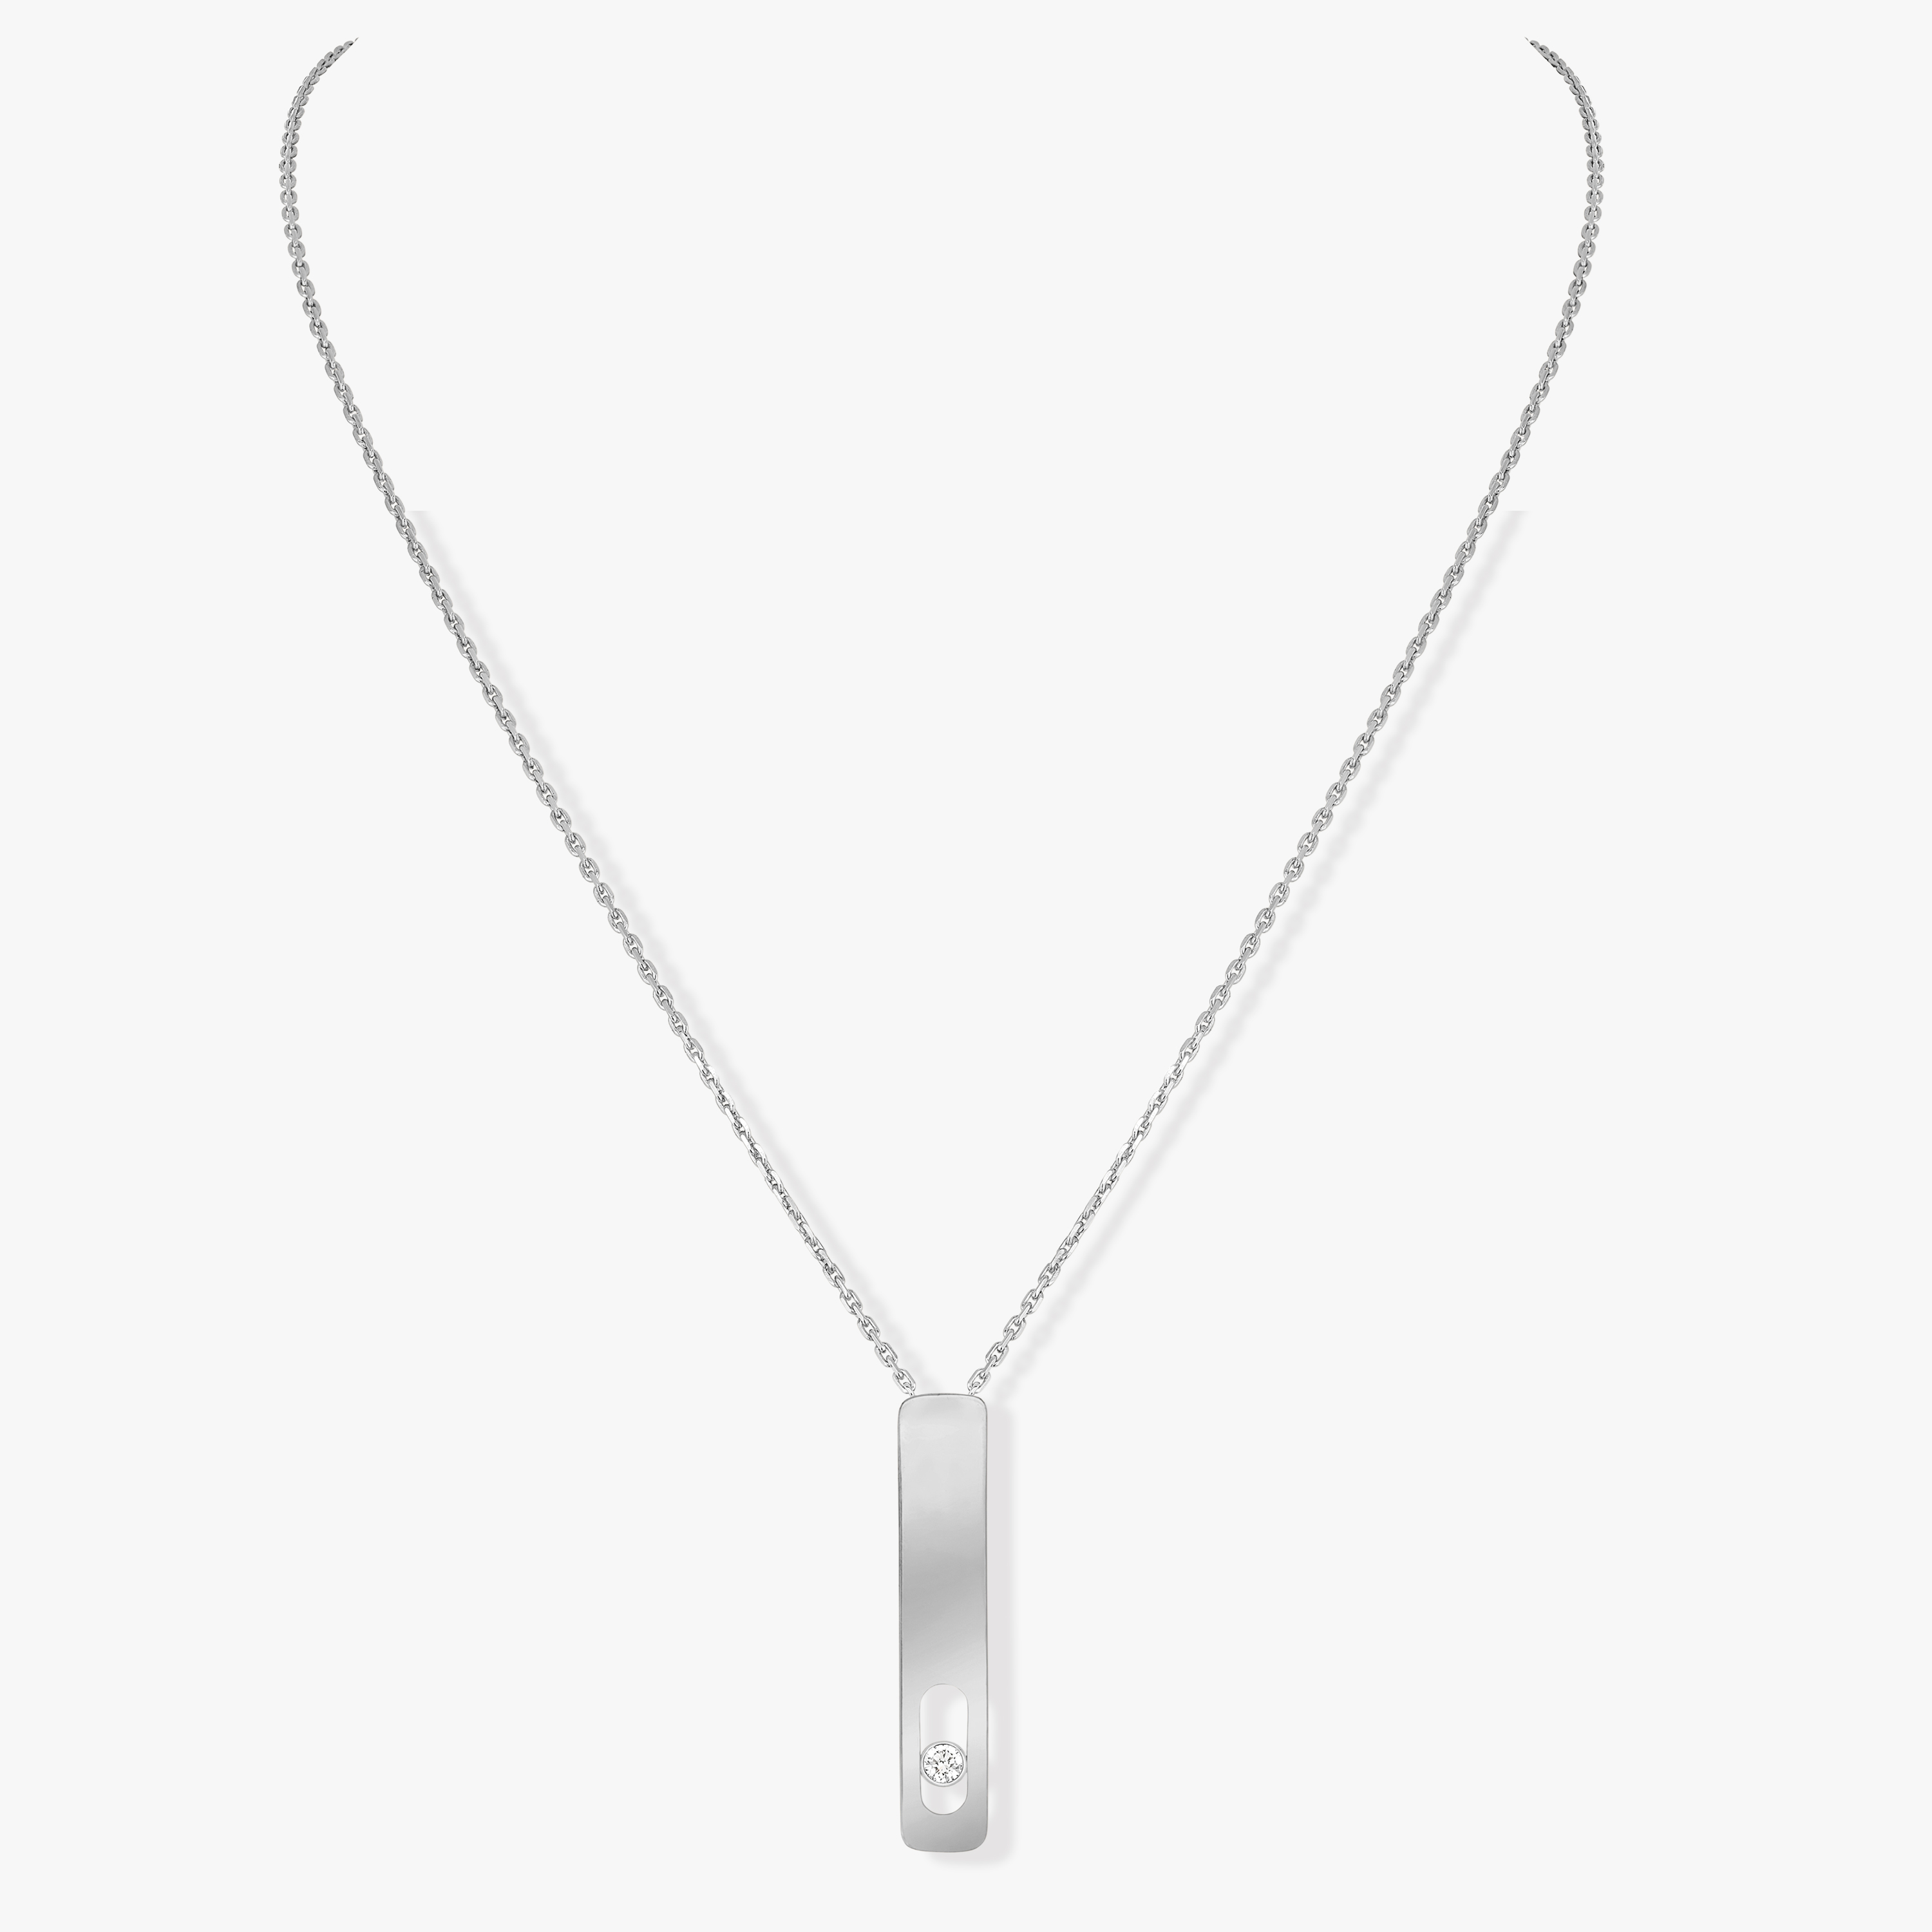 My First Diamond LM White Gold For Her Diamond Necklace 10039-WG